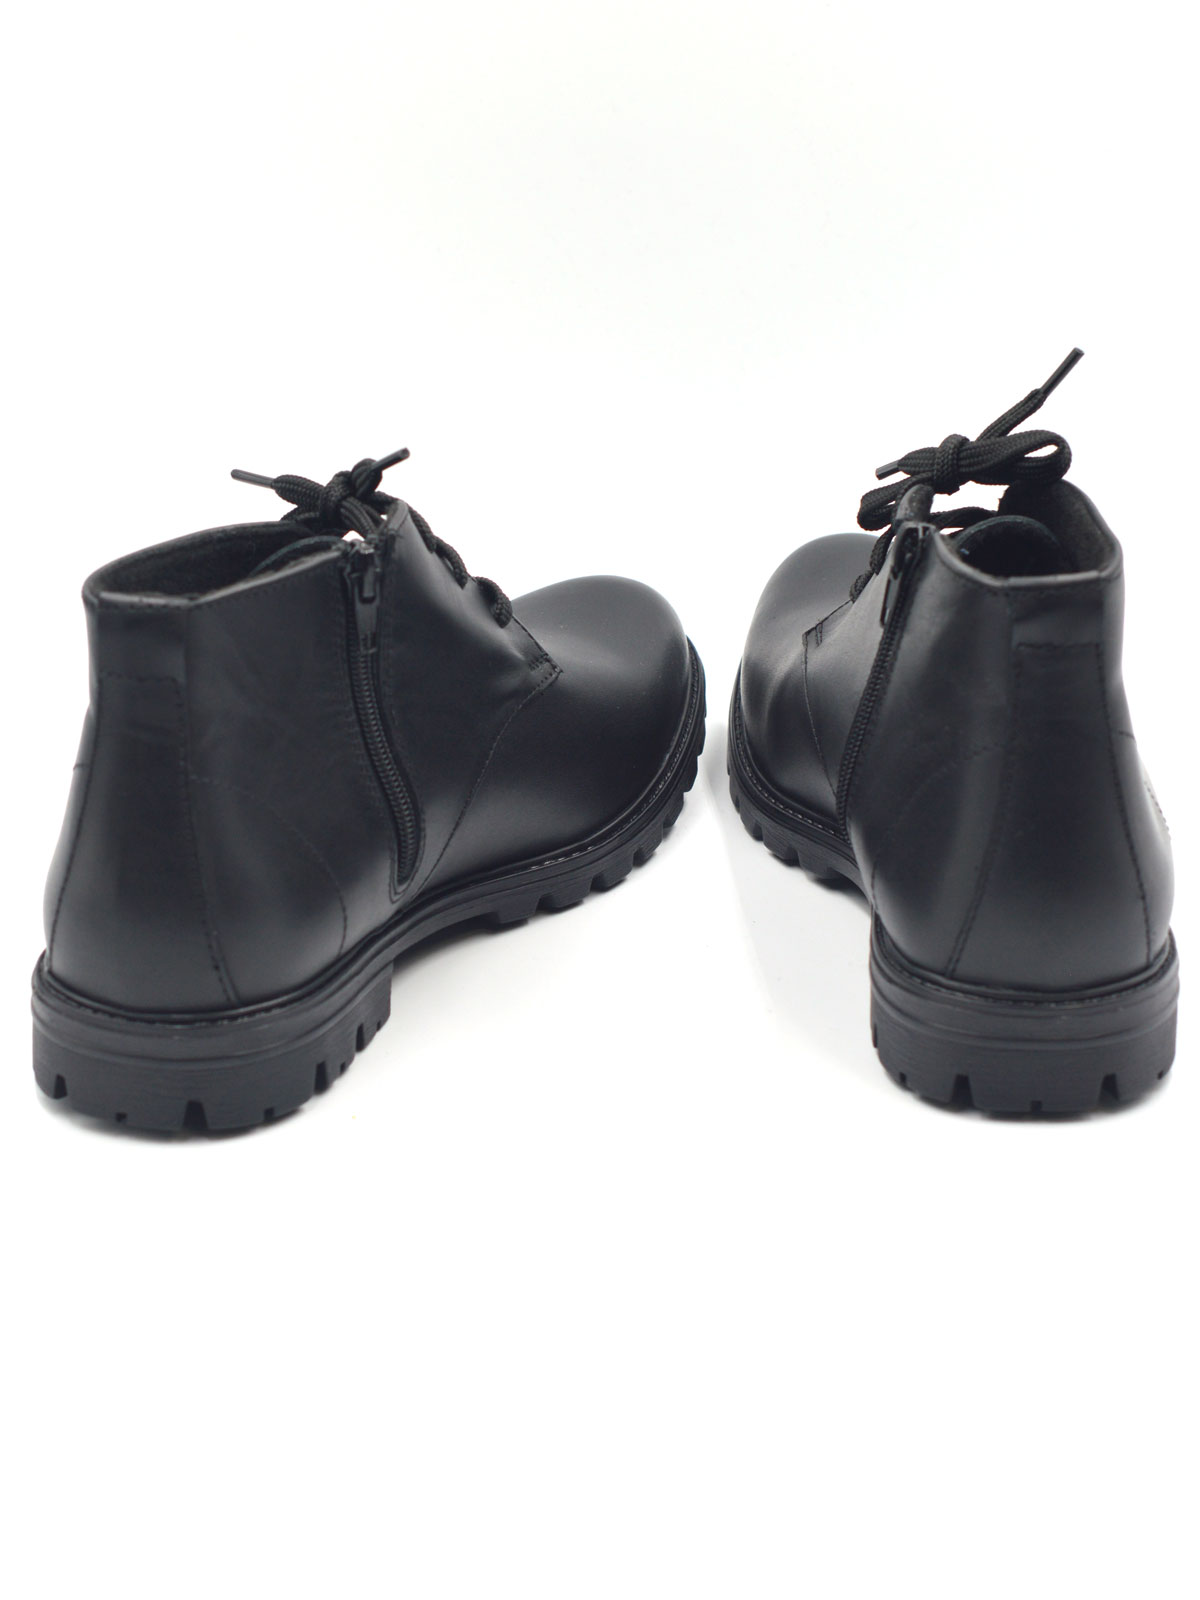 Black sporty elegant boots with laces - 81087 - € 83.24 img4